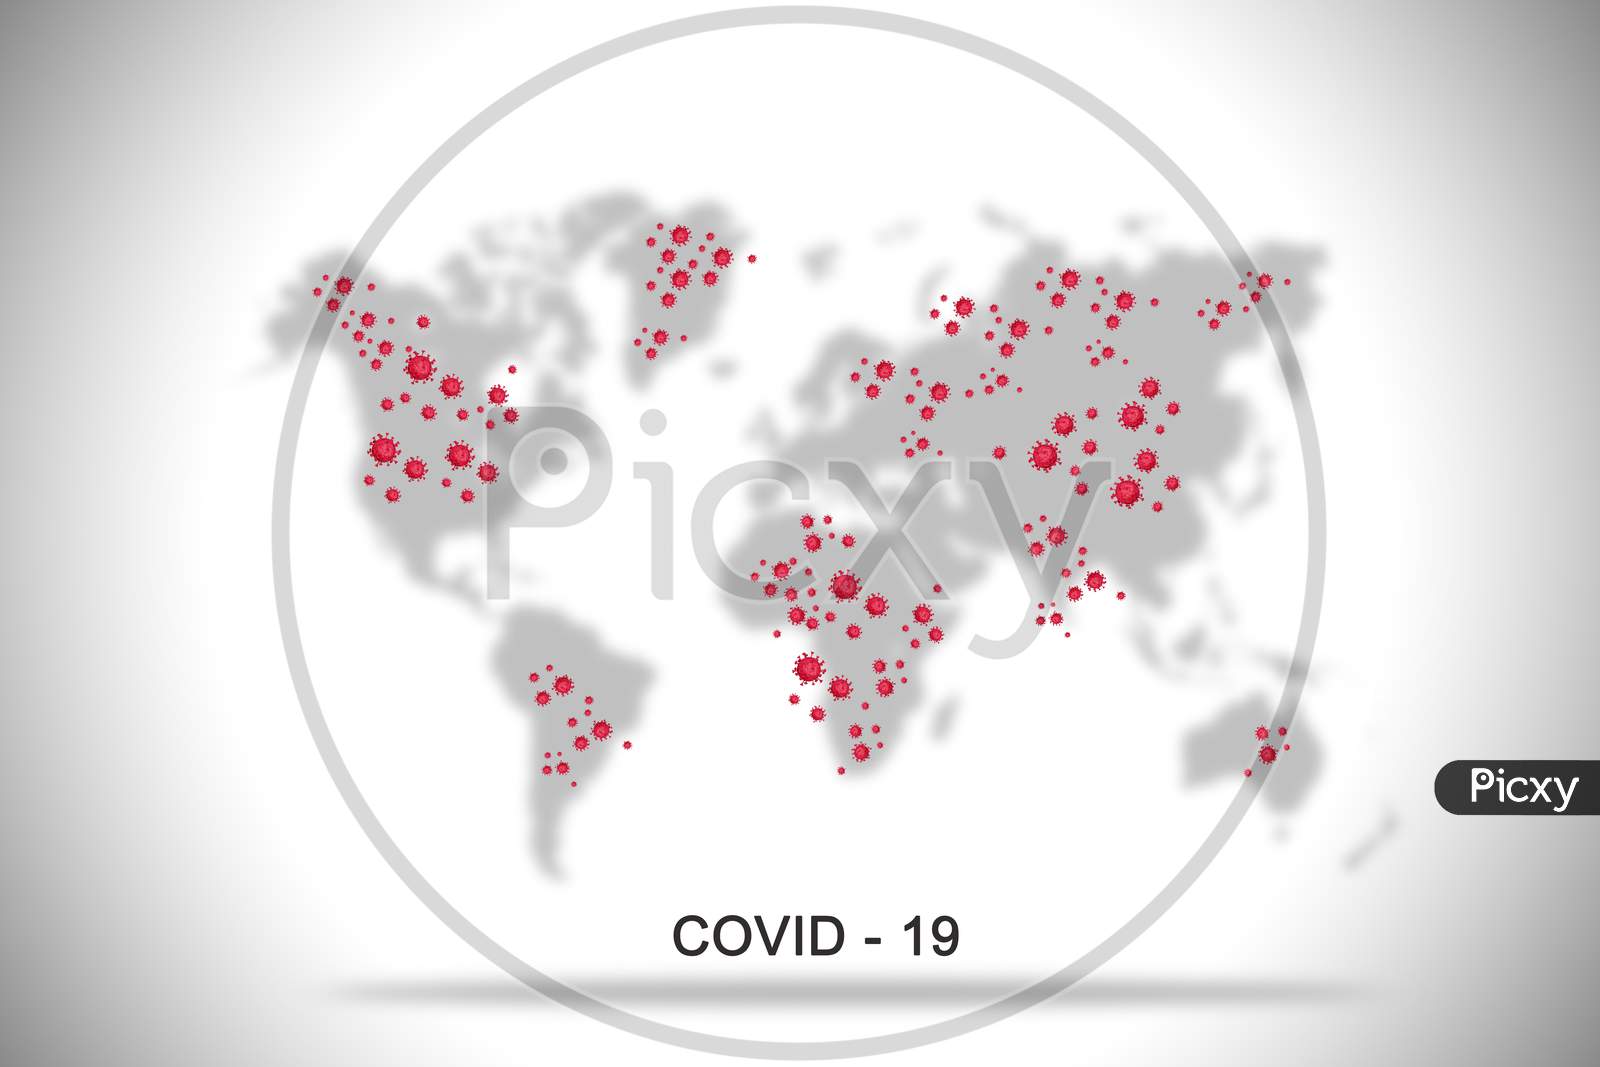 Illustration On Spreading Of Covid-19 Disease With Corona Virus In The Whole World.